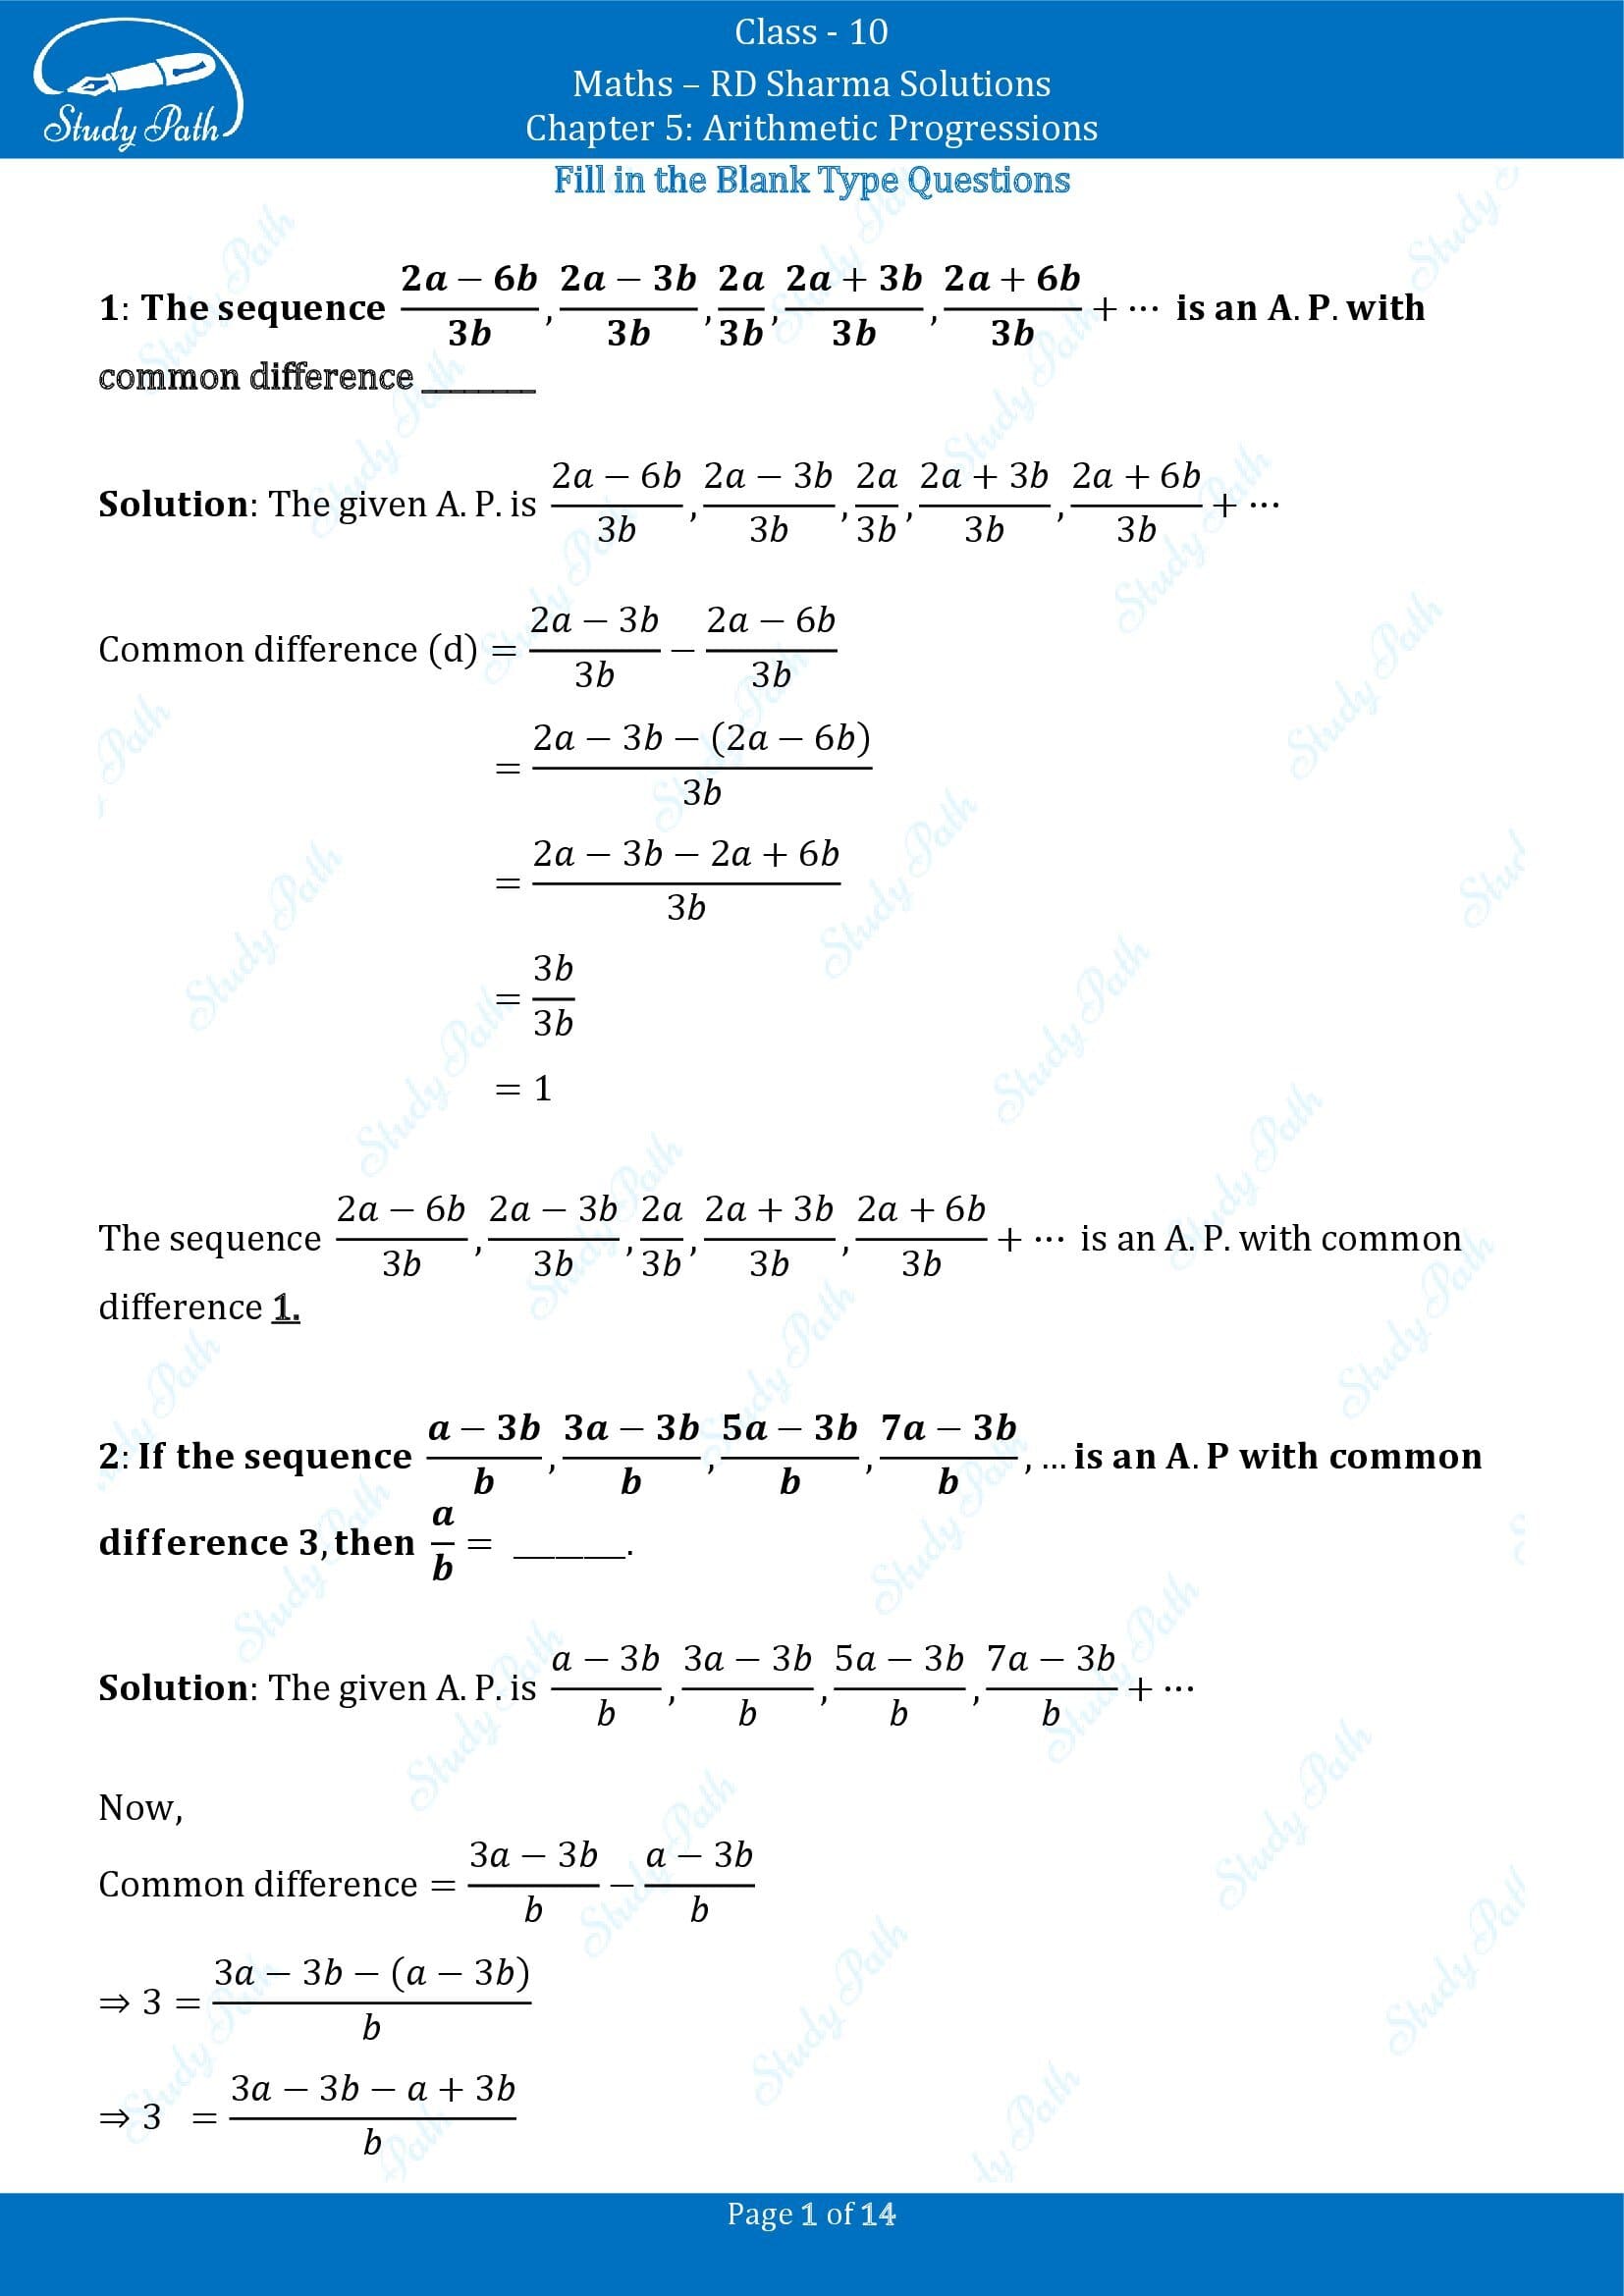 RD Sharma Solutions Class 10 Chapter 5 Arithmetic Progressions Fill in the Blank Type Questions FBQs 00001